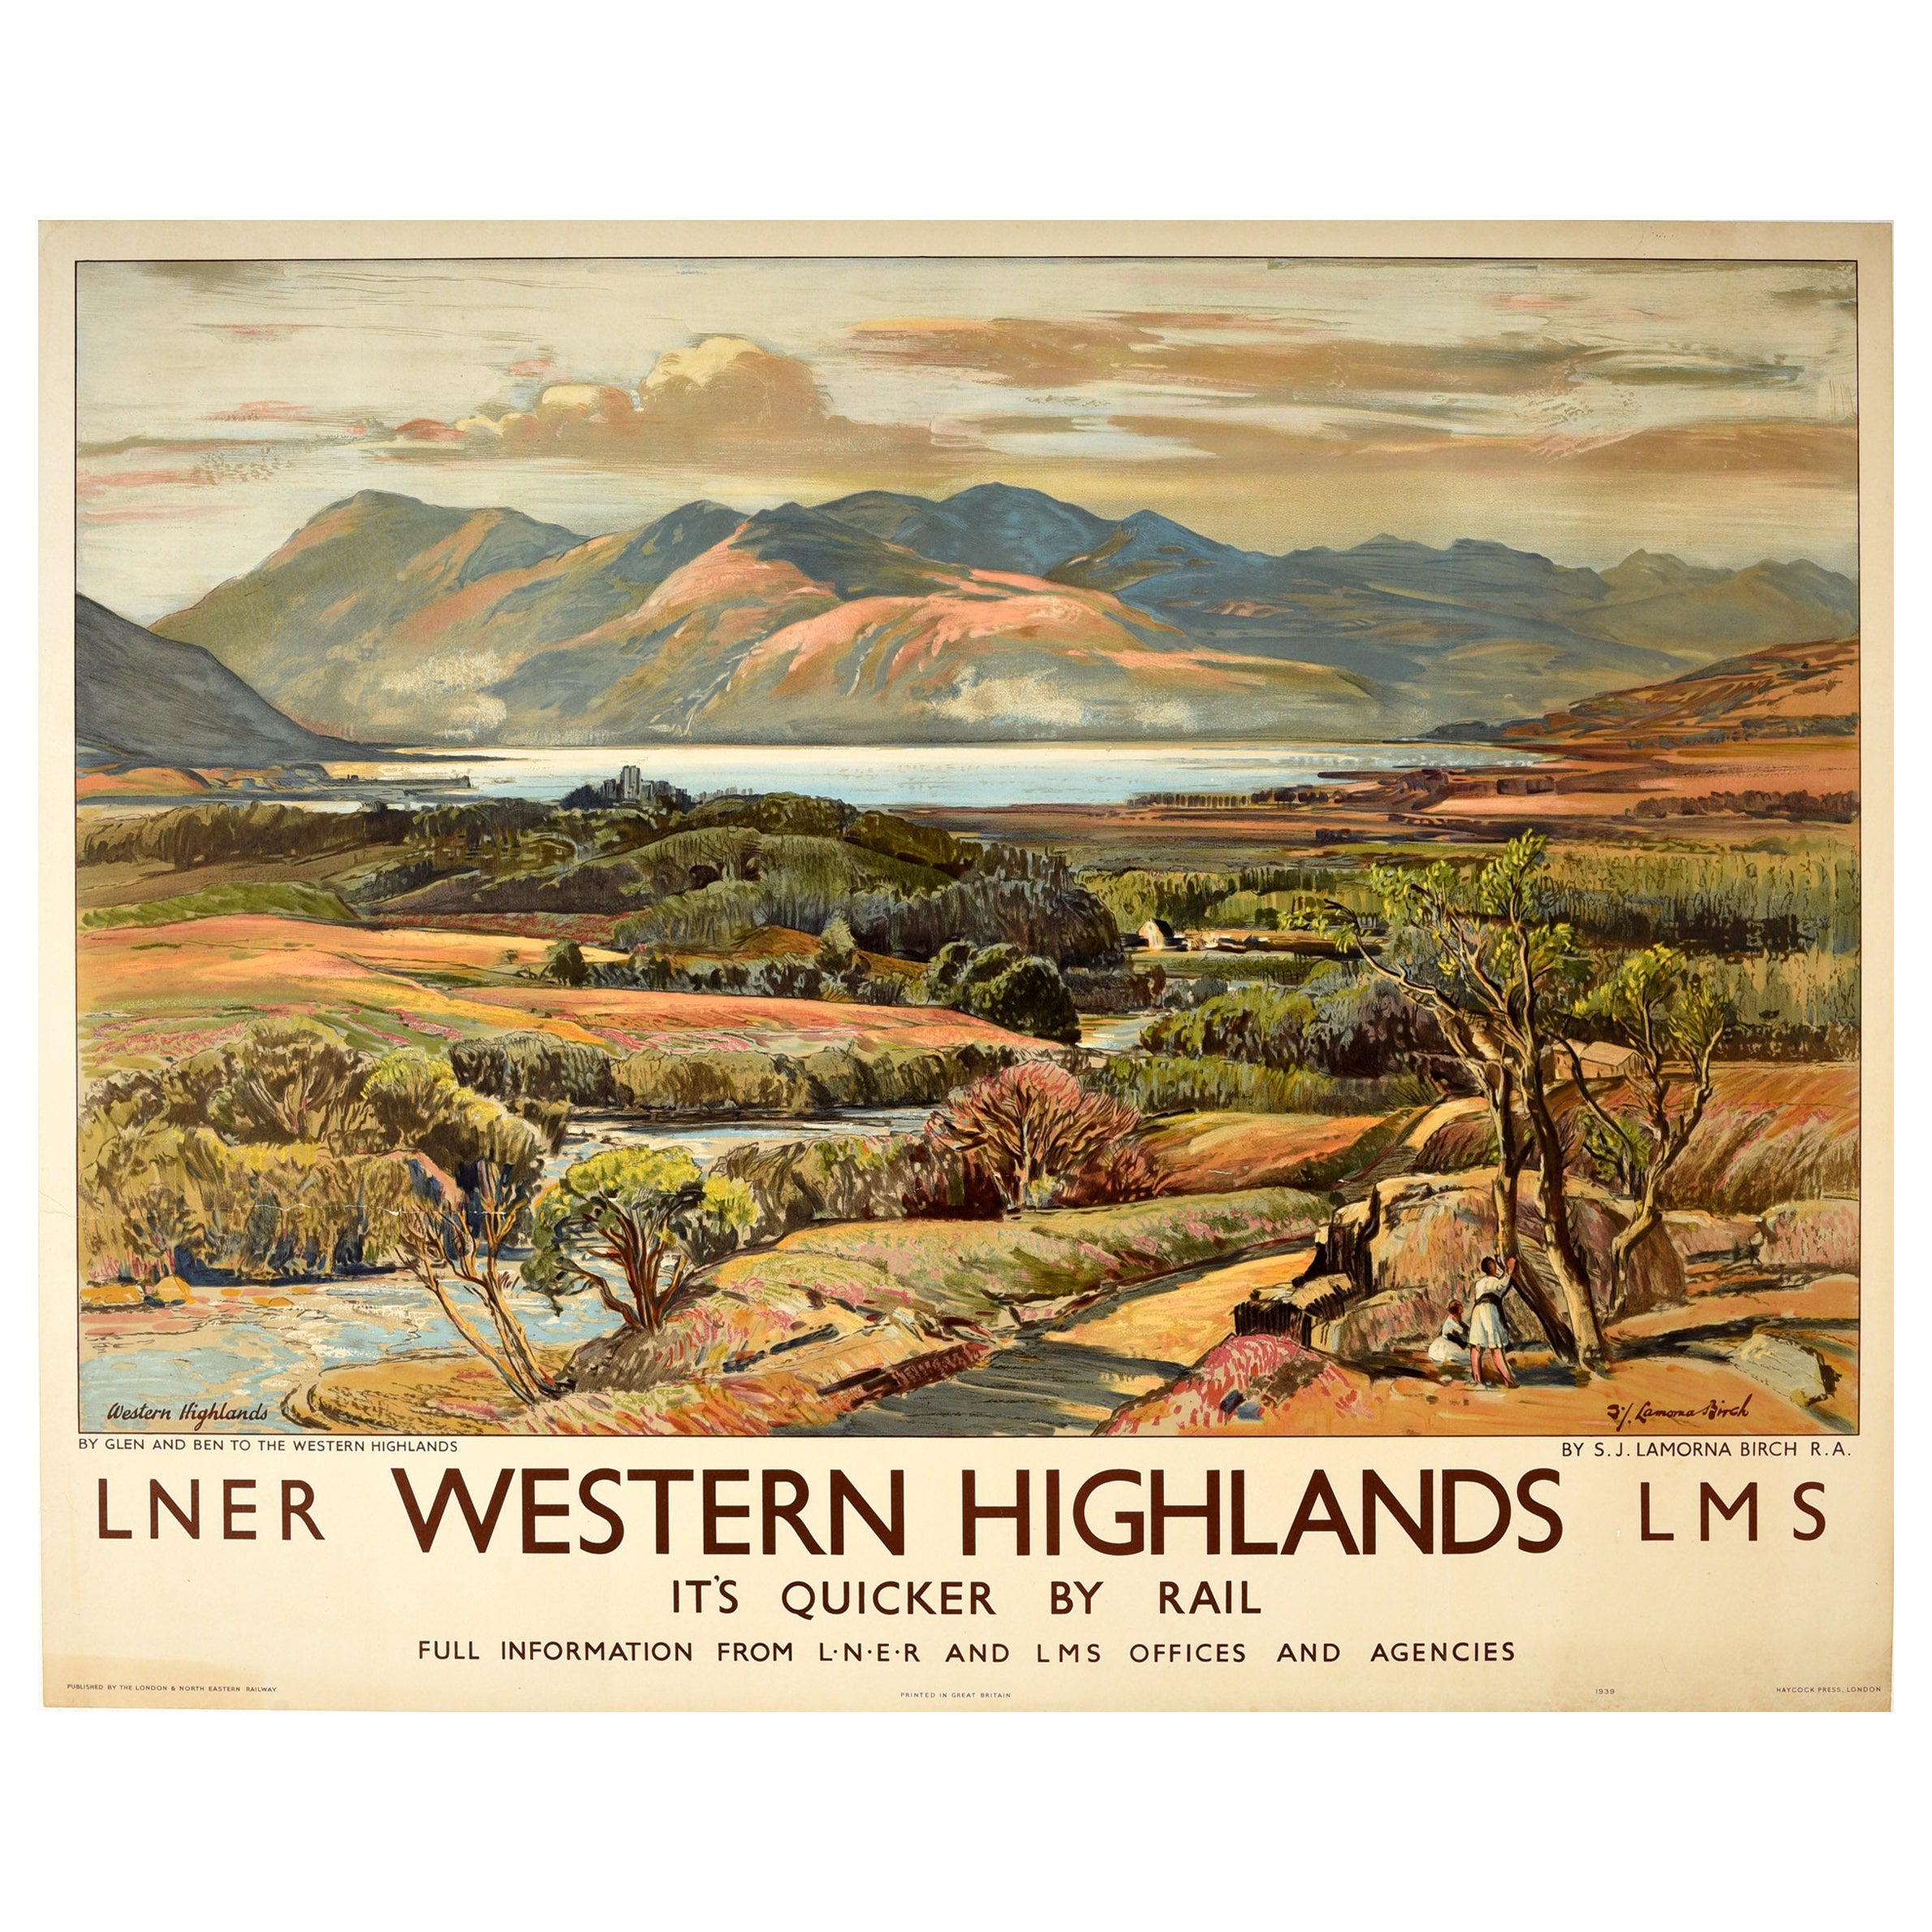 The Central Highlands Railway Old Advert Poster Mountain Scotland Holiday Photo 